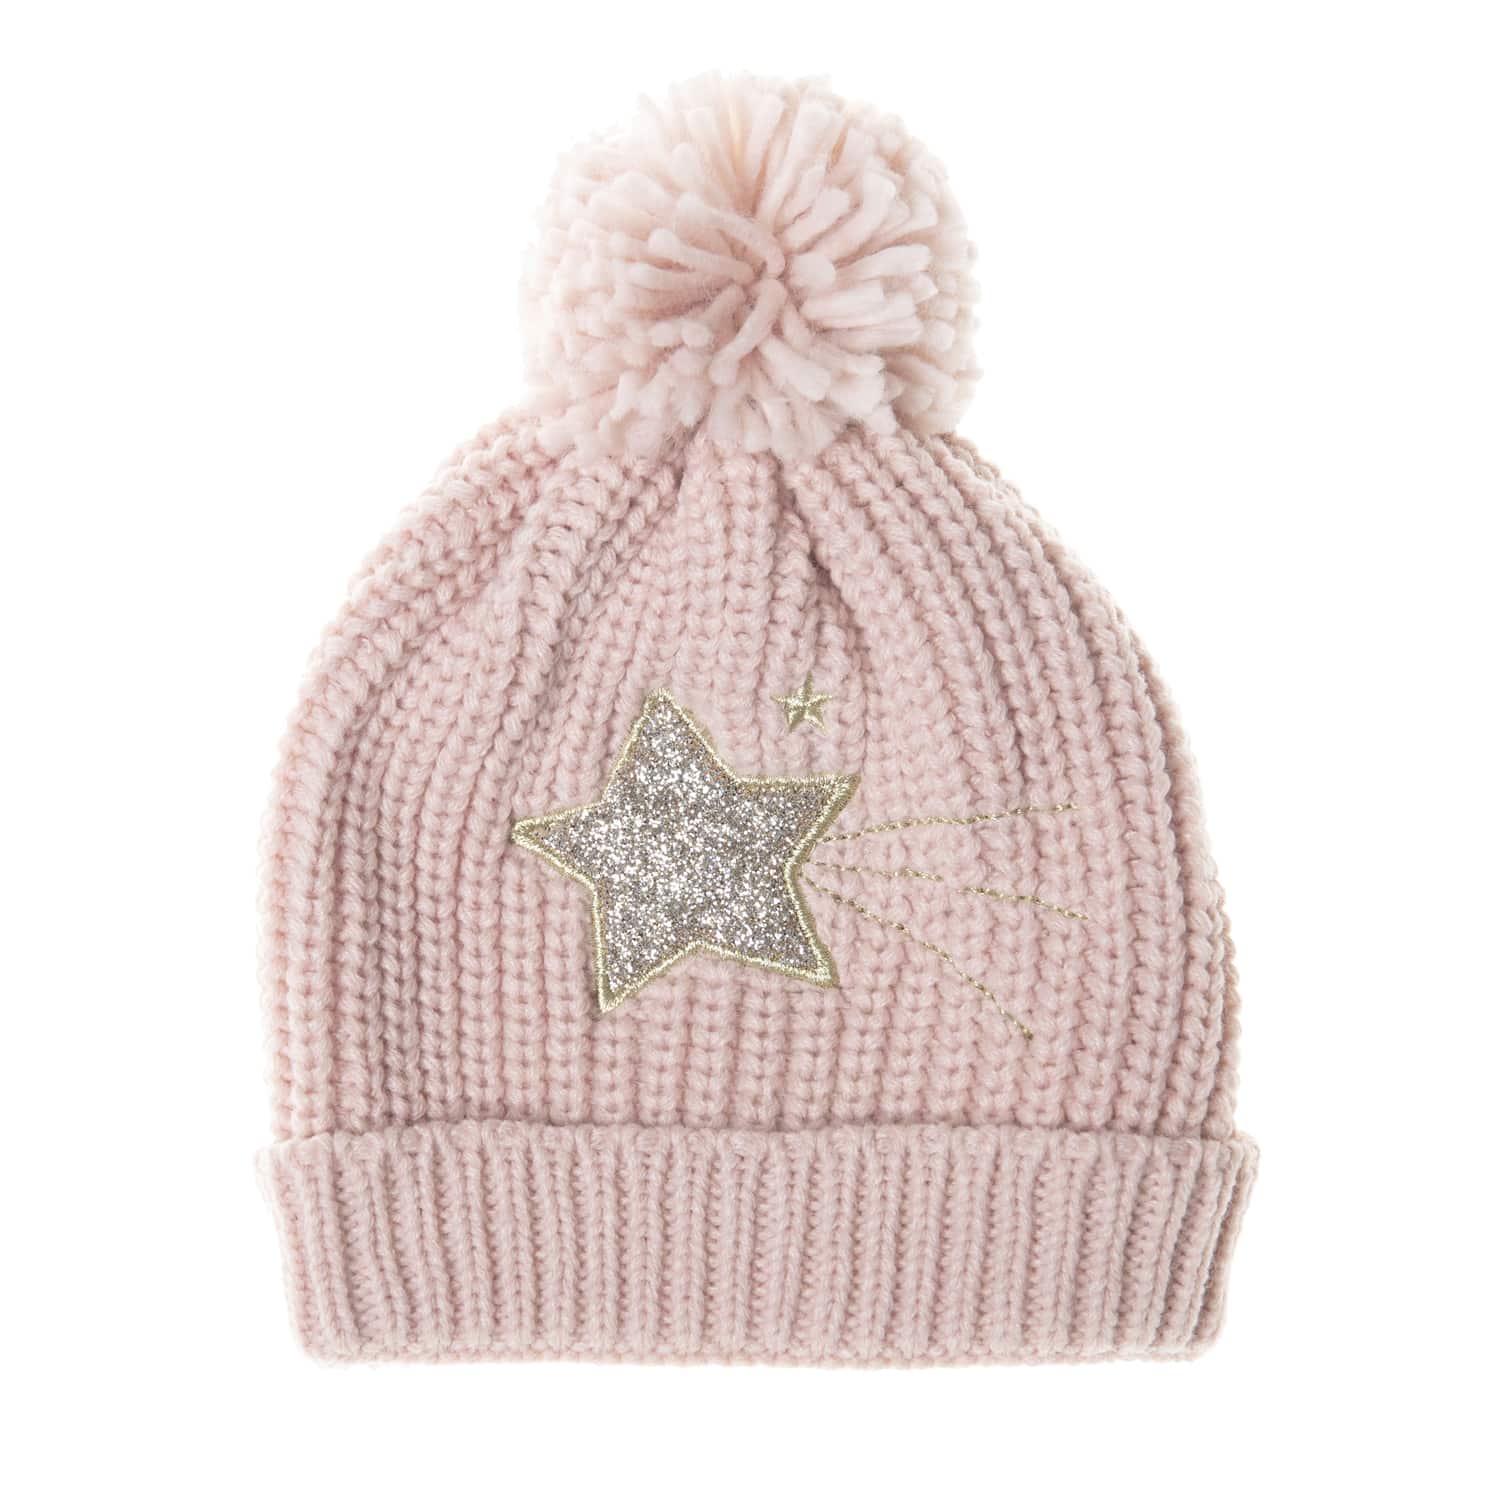 rockahula pale pink bobble hat with stars